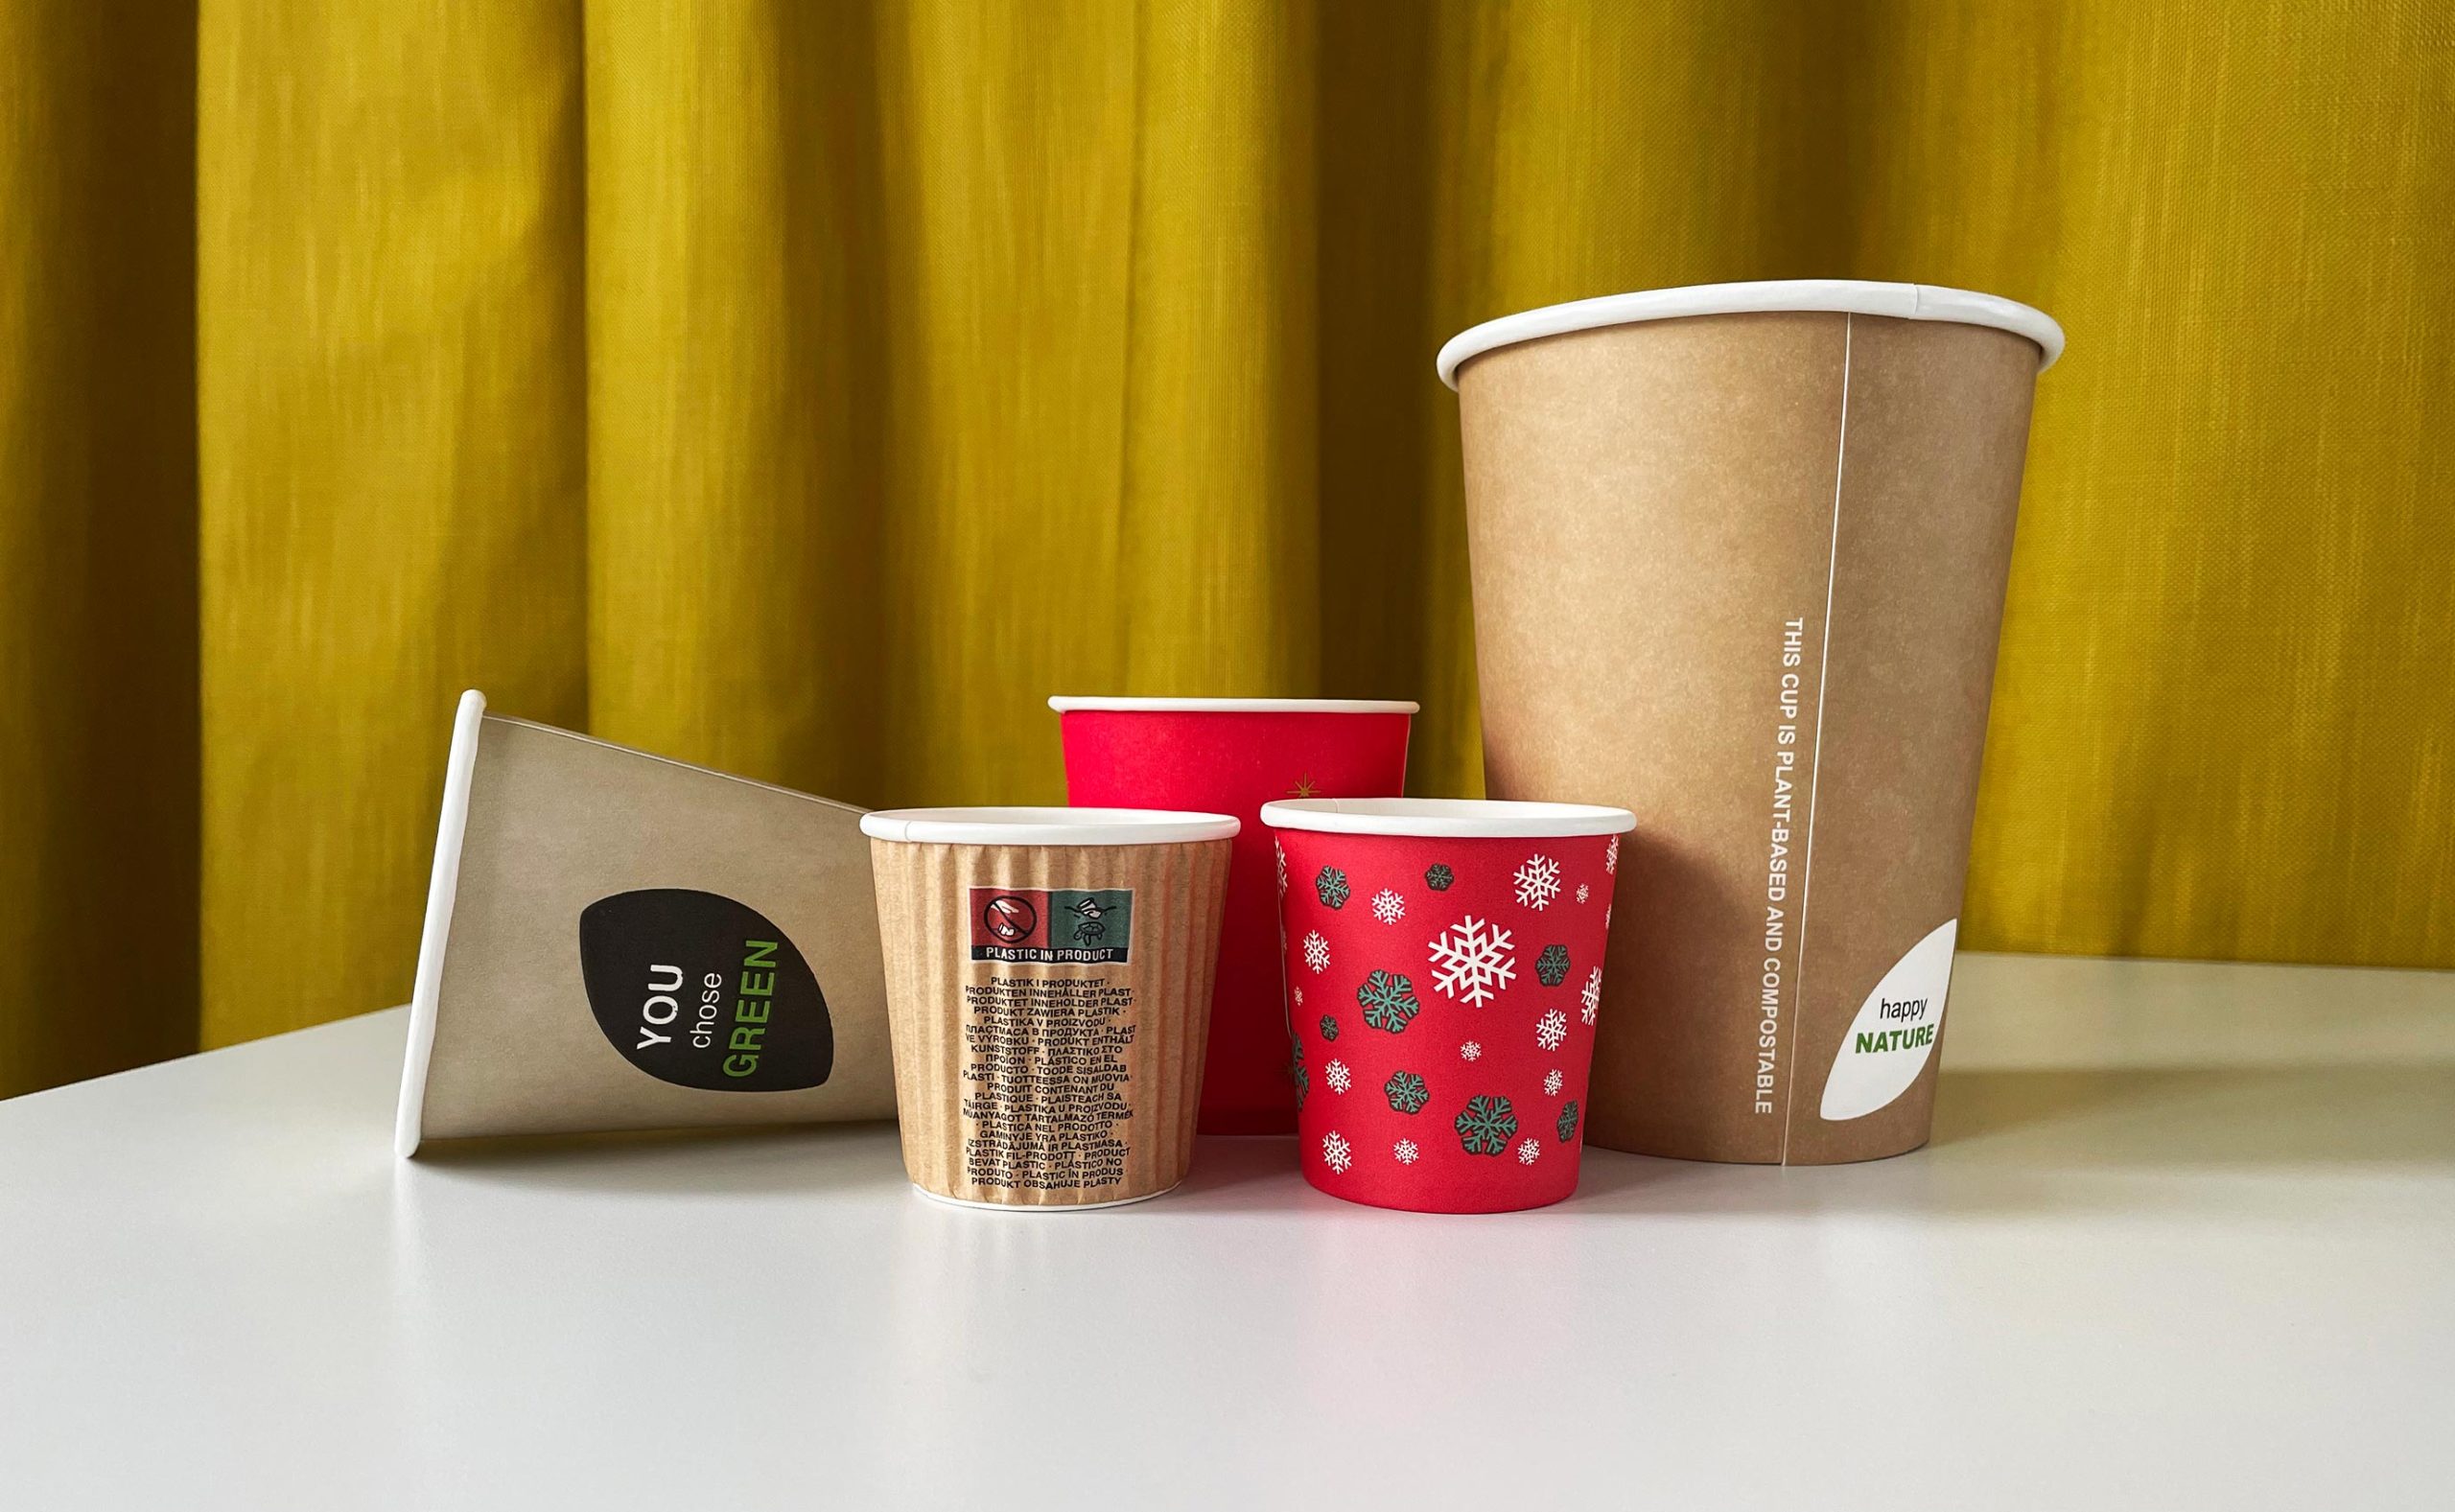 bioplastic-backfire-why-paper-cups-are-just-as-toxic-as-plastic-cups